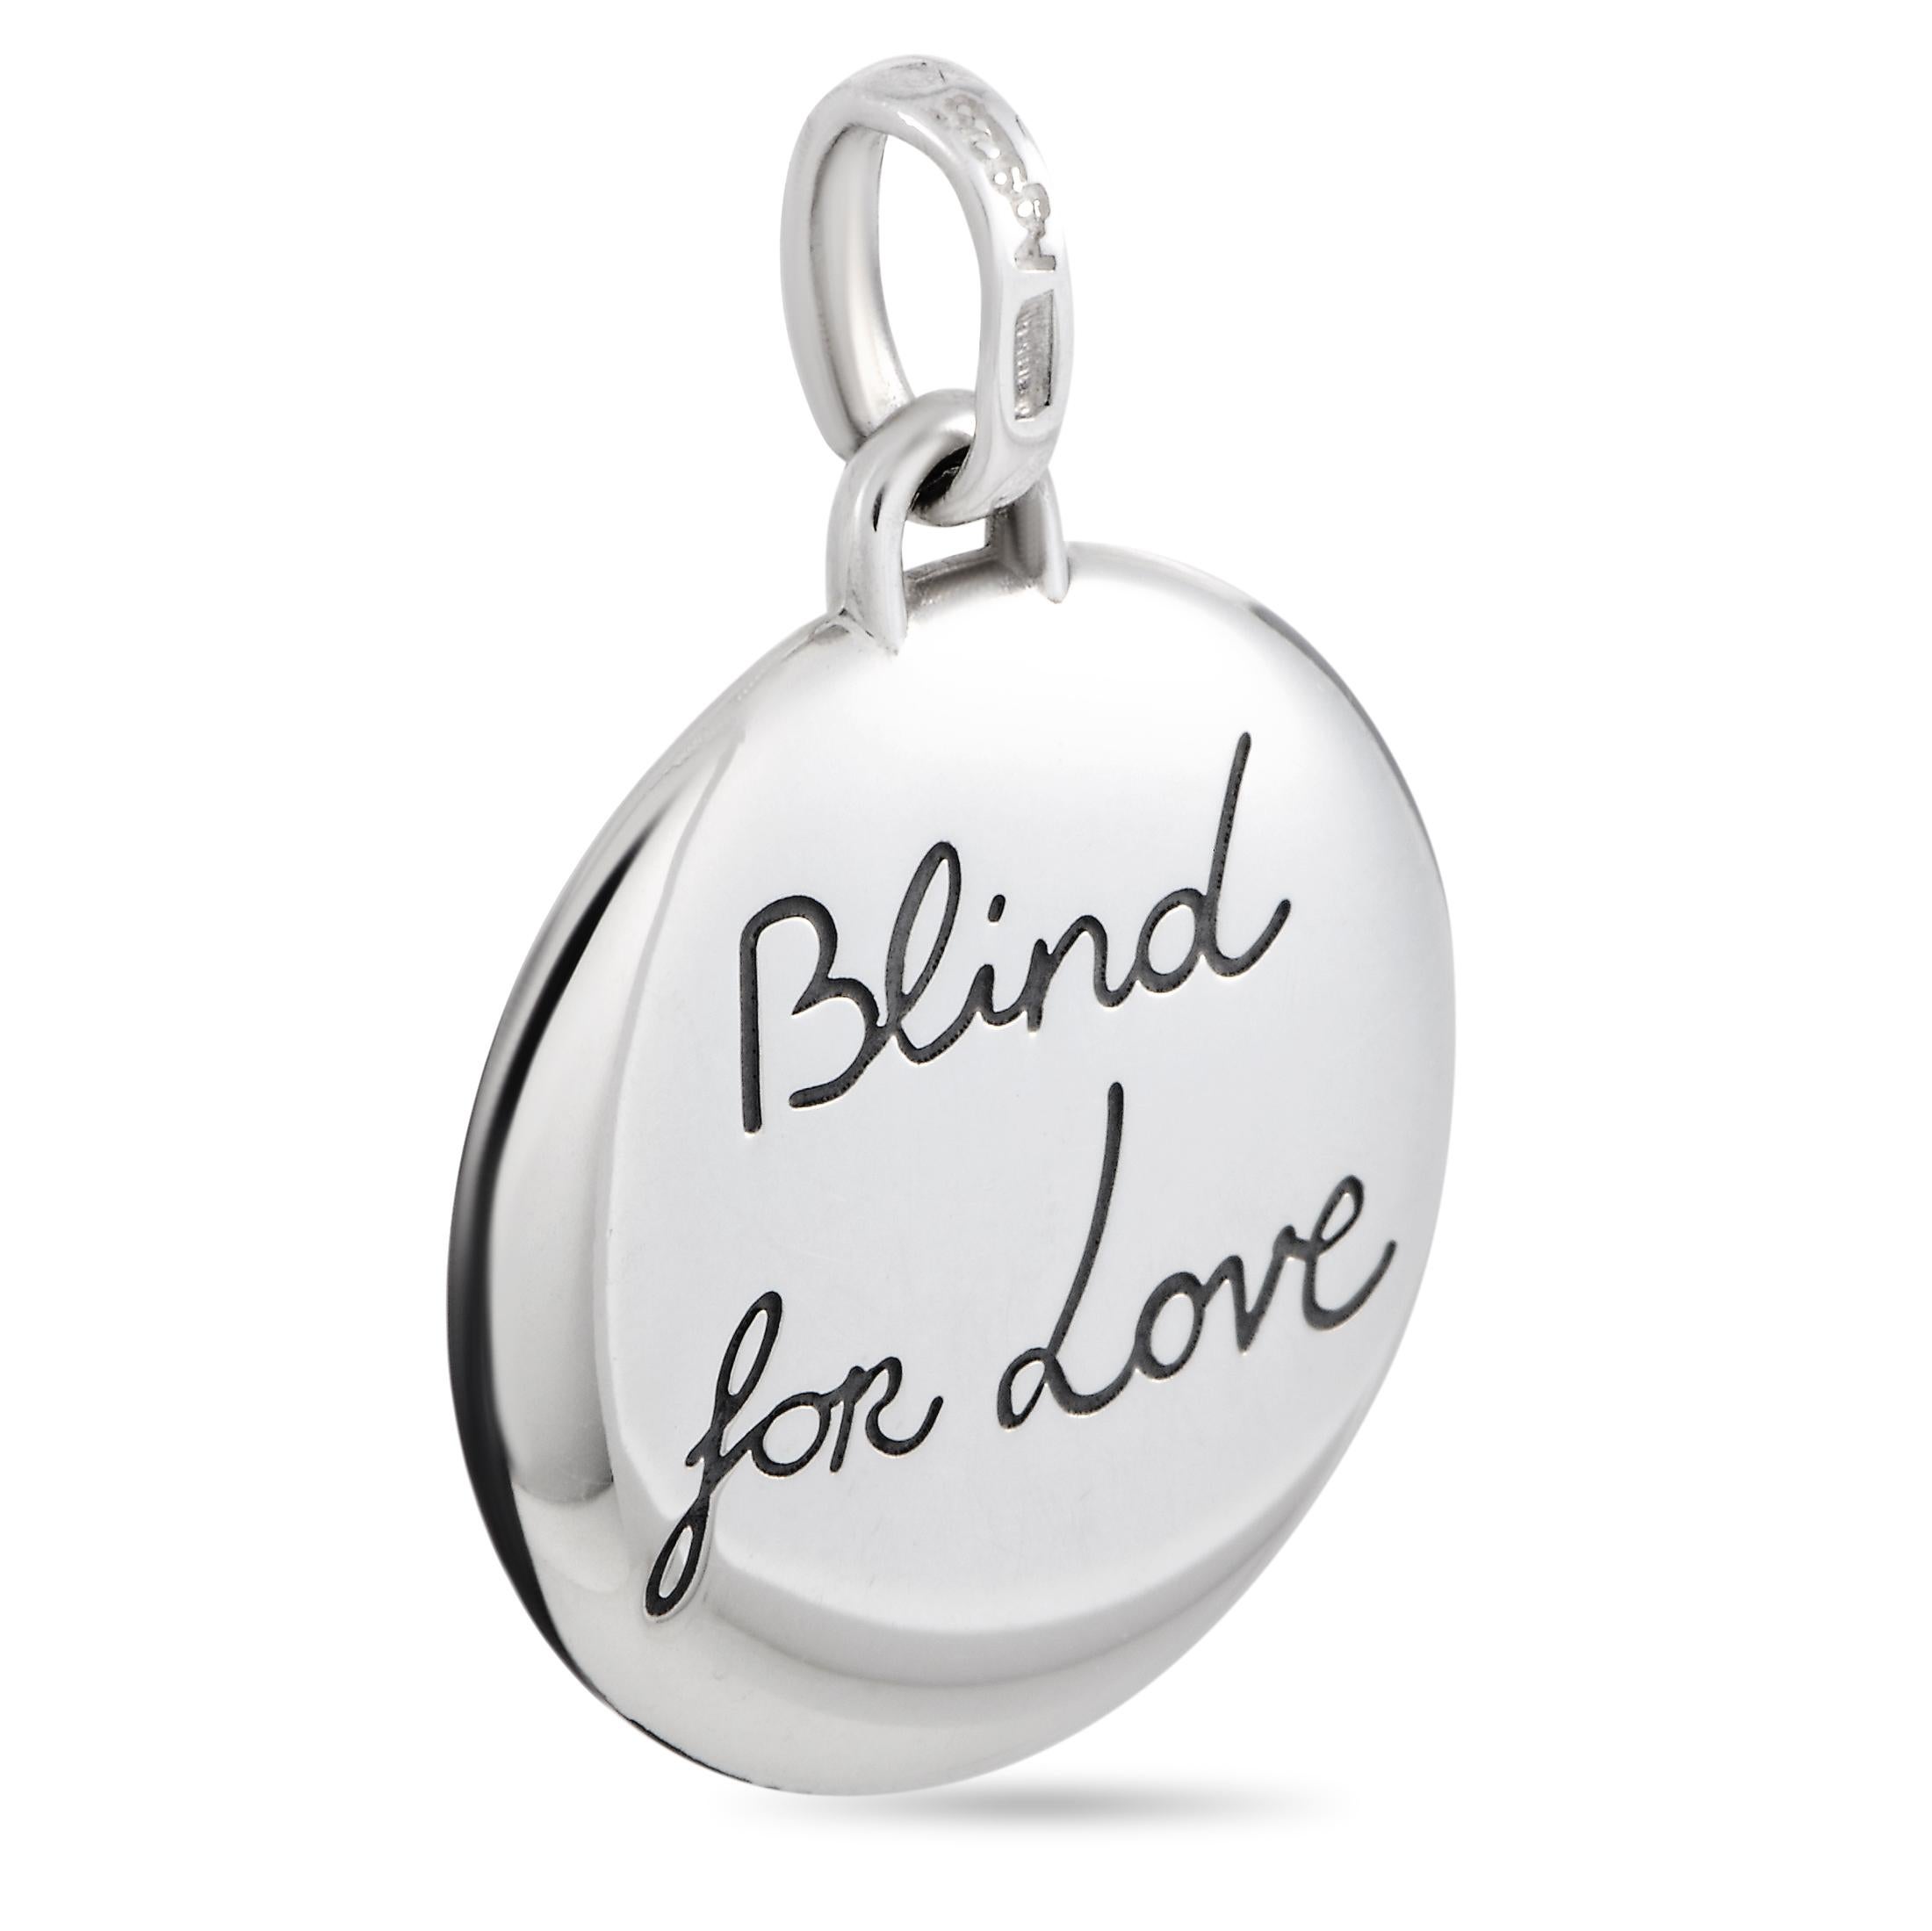 The Gucci “Blind For Love” charm is made of sterling silver with aureco black finish and weighs 8 grams. The charm measures 1” in length and 0.88” in width.
 
 This item is offered in brand new condition and includes the manufacturer’s box and